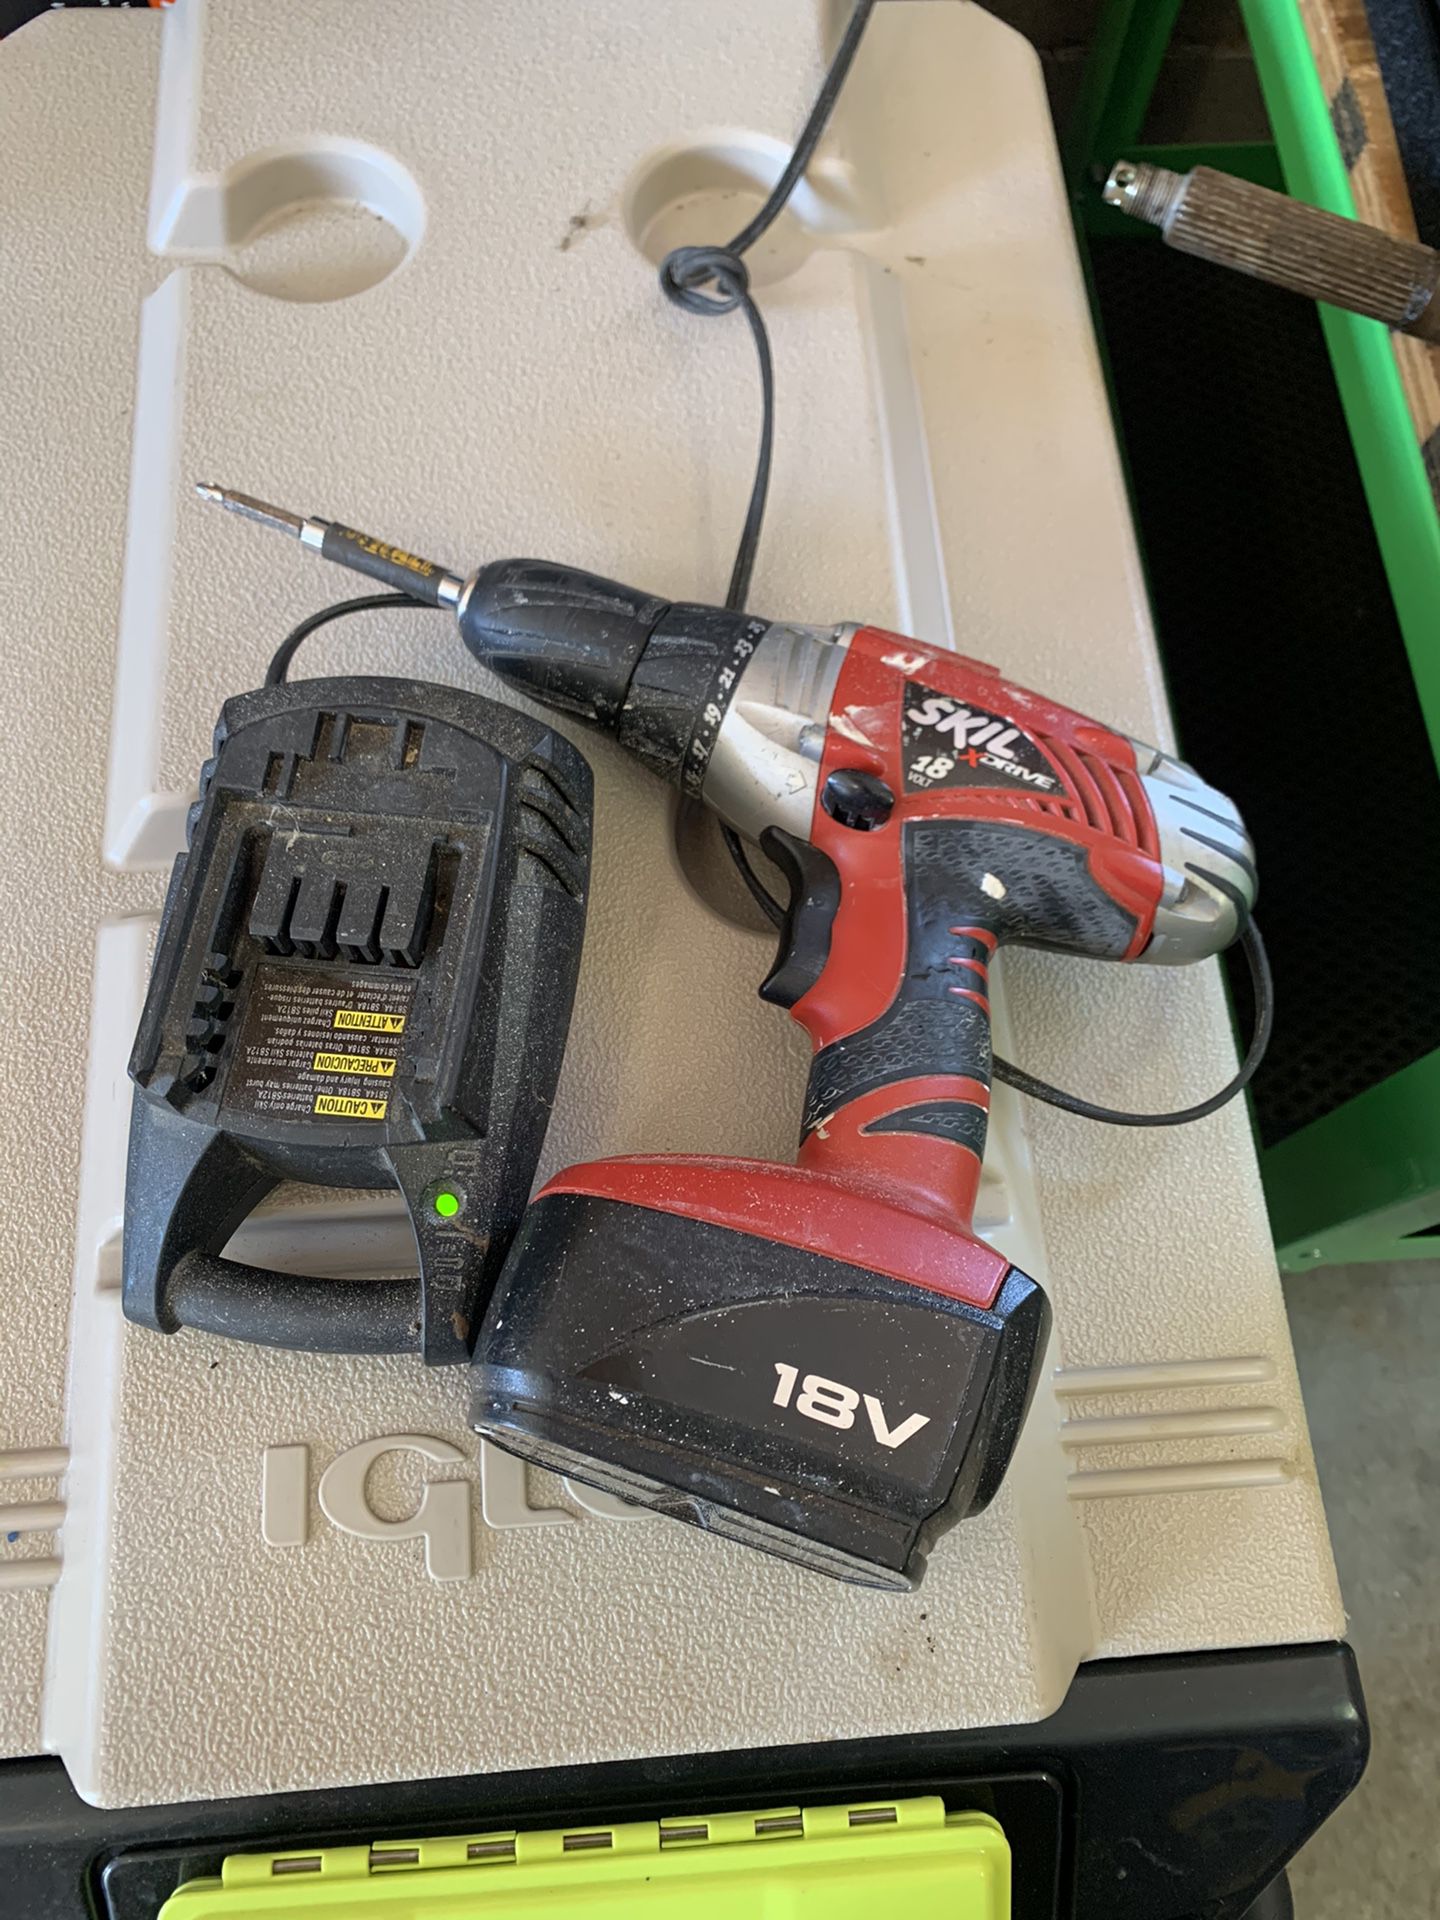 Skil 18 volt drill with charger